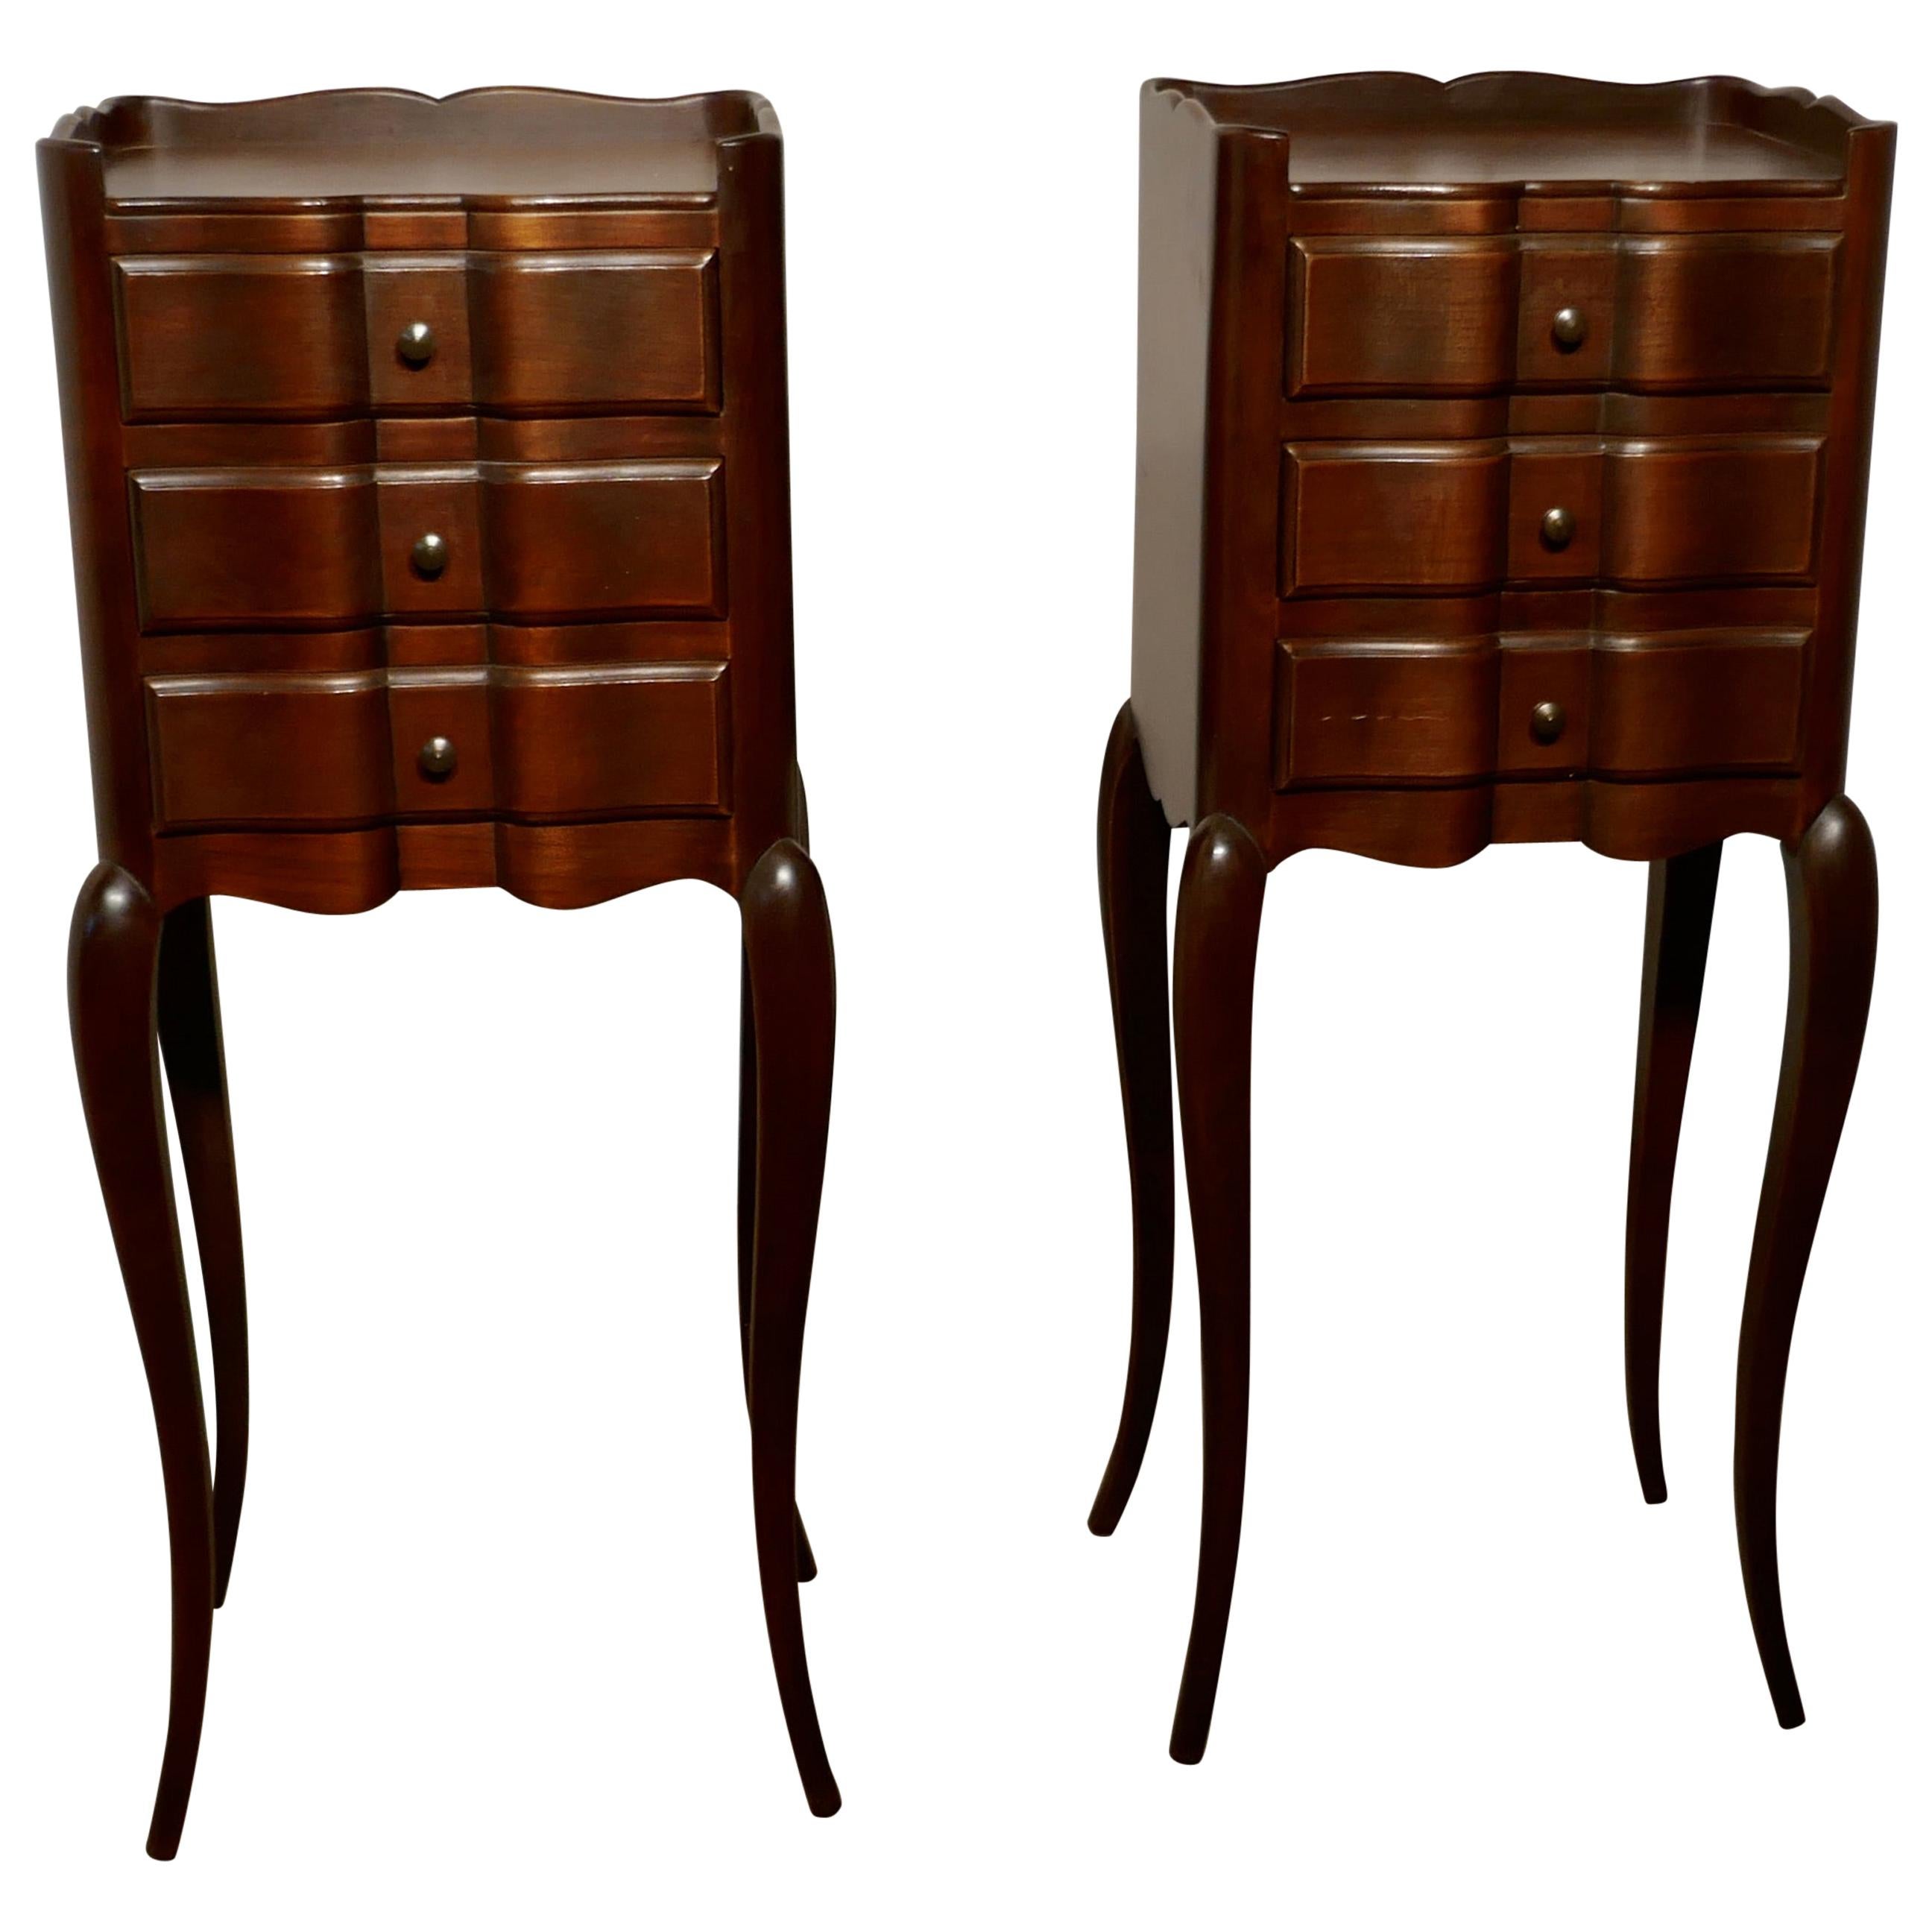 Pair Of French Dark Walnut Bedside Cabinets With Drawers For Sale